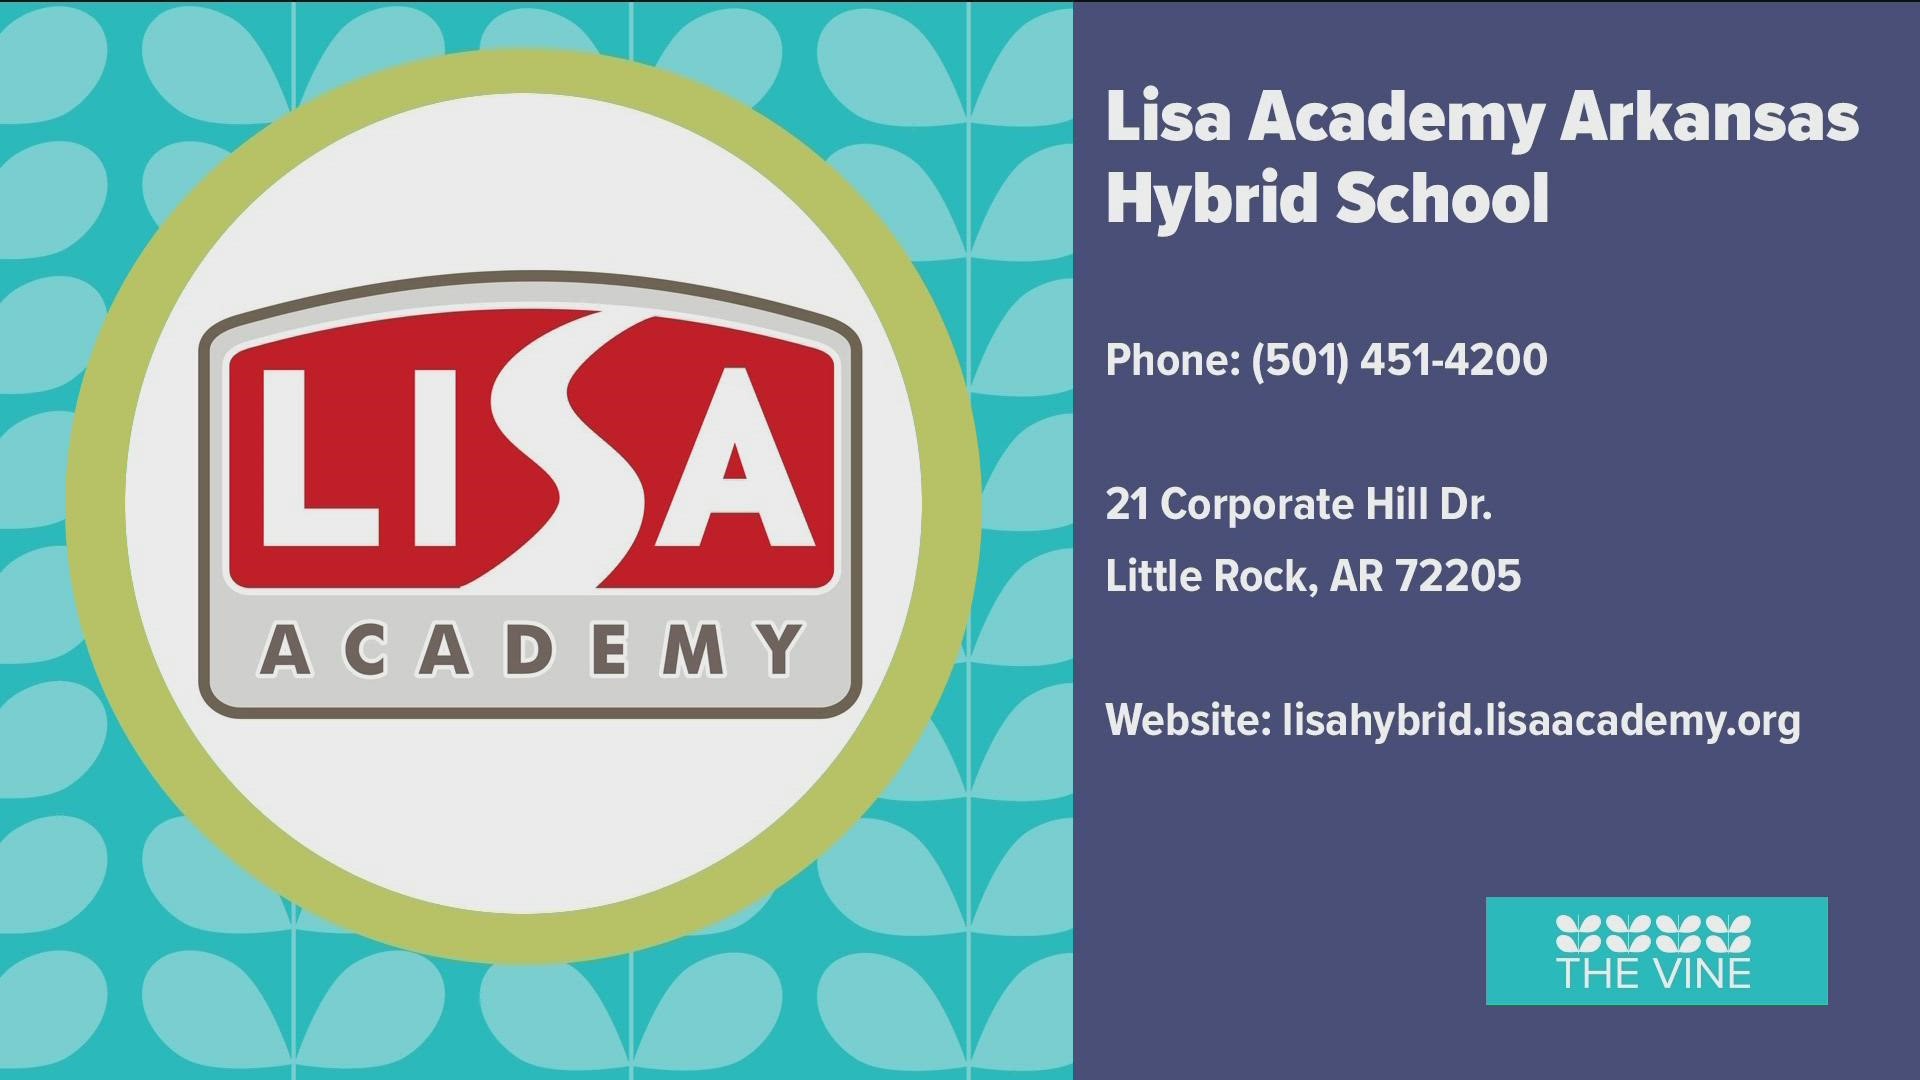 The LISA Academy Arkansas Hybrid School combines virtual instruction and onsite intervention/enrichment for students in grades K-12.